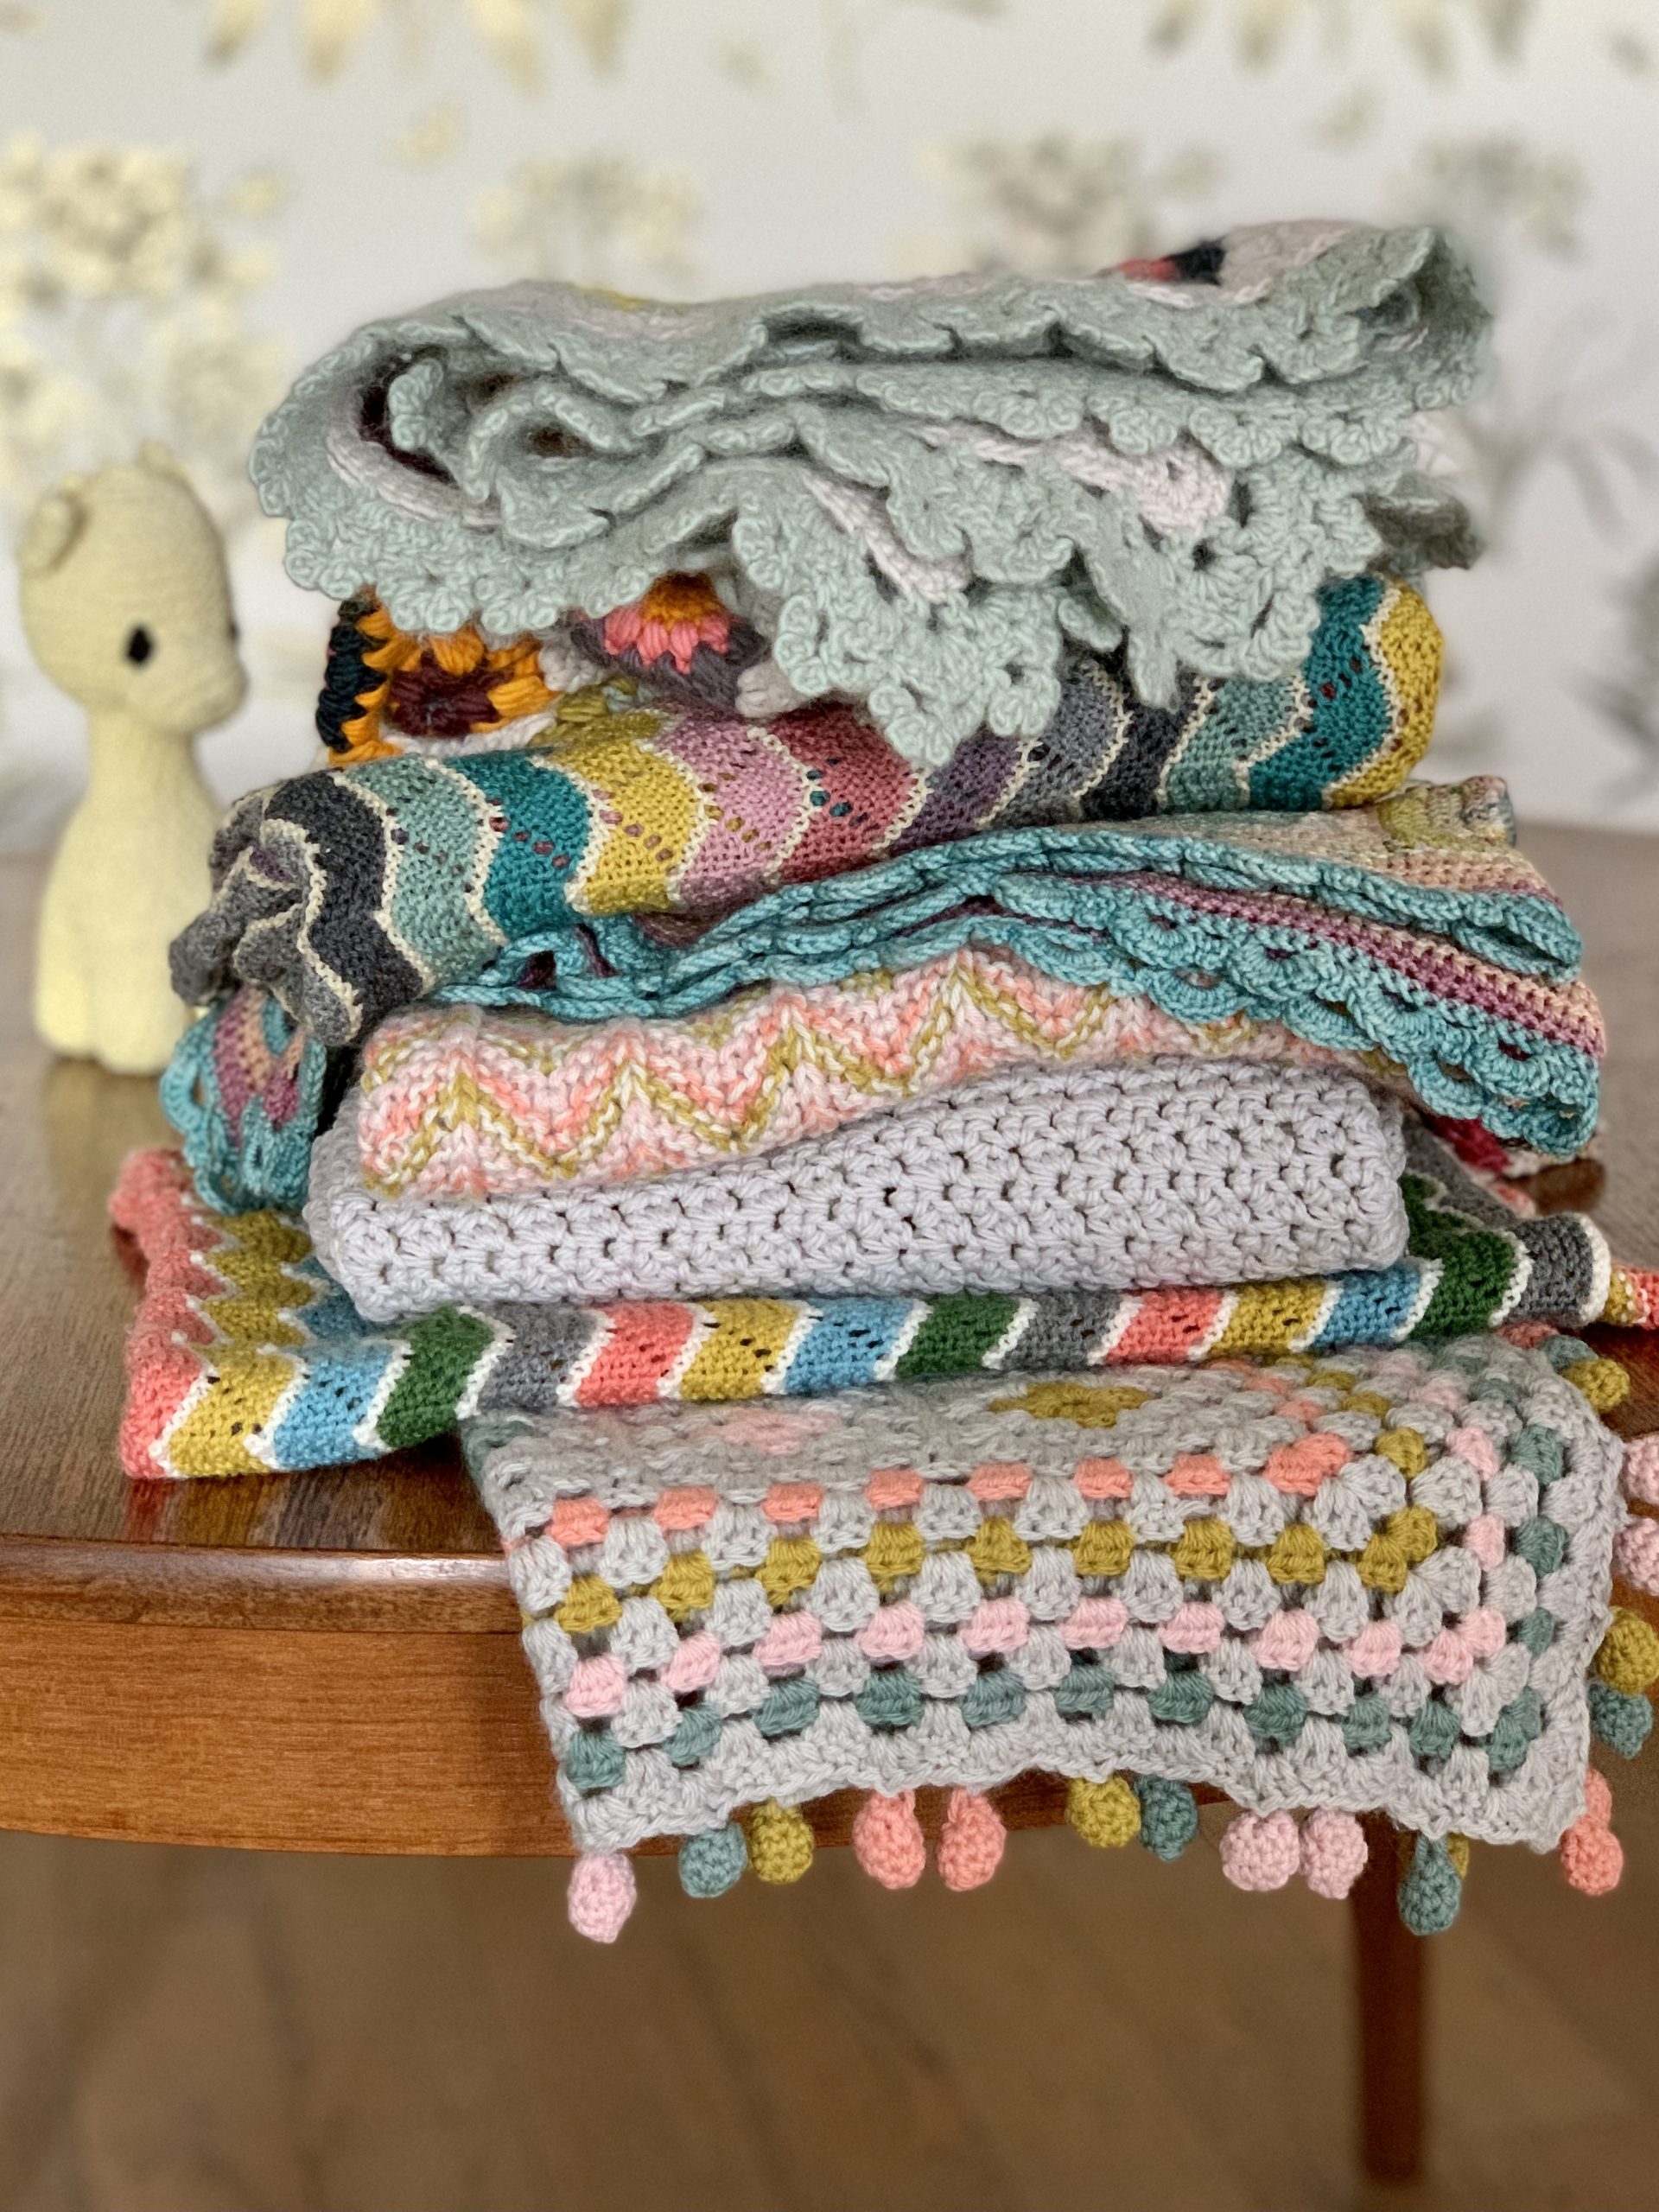 Comfort in knitting &crochet with beautiful blankets